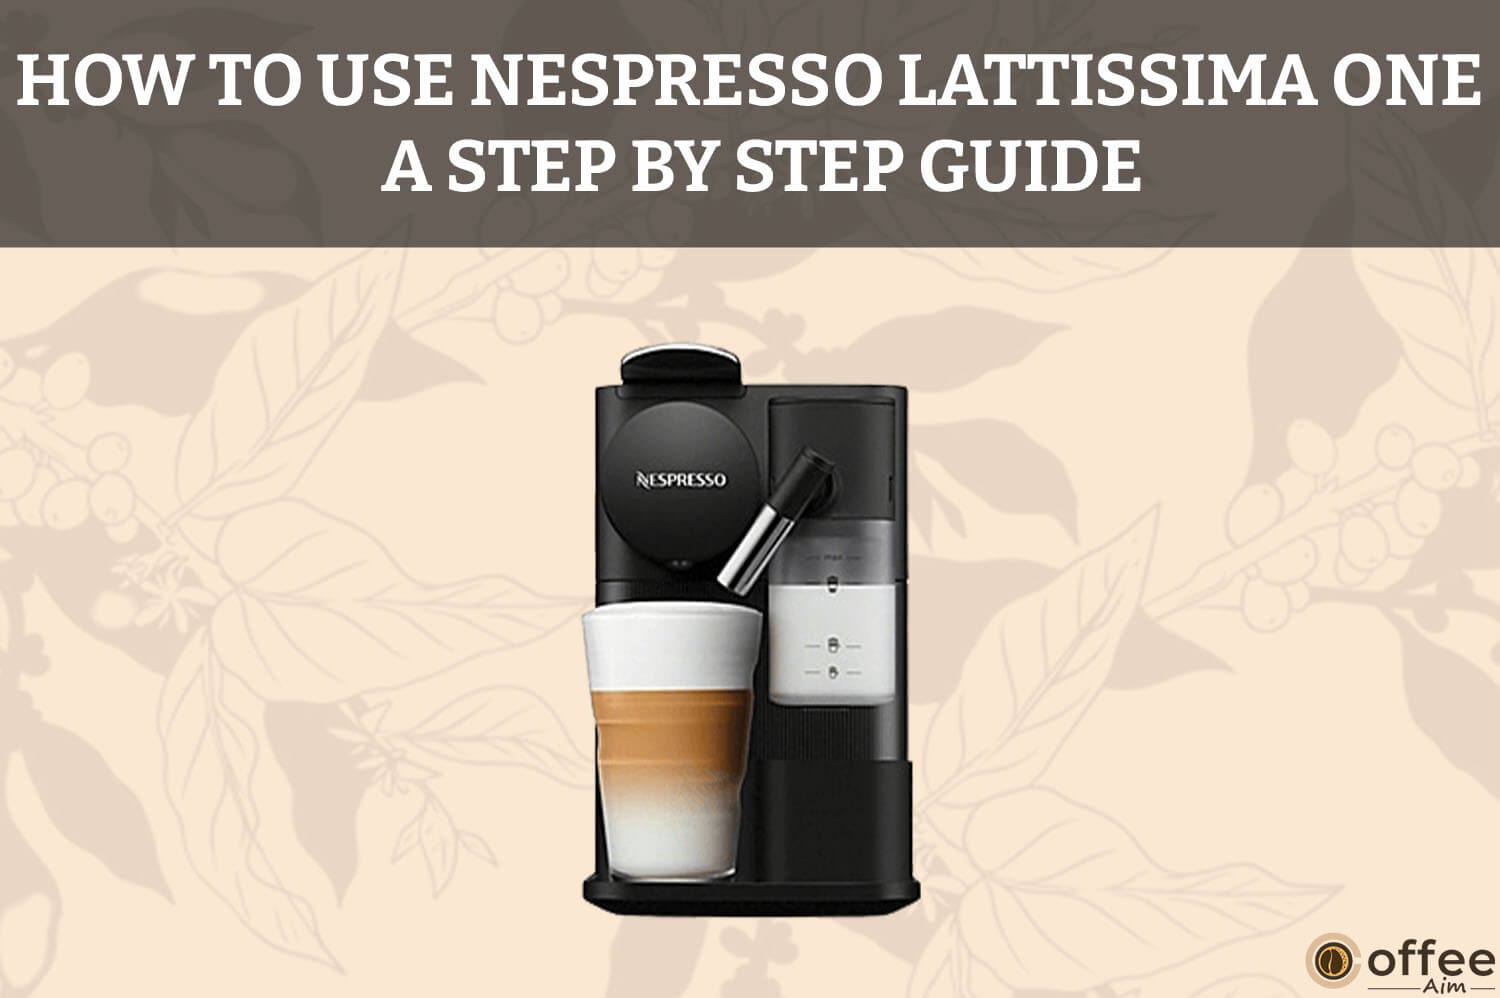 How-to-Use-Nespresso-Lattissima-One-A-Step-by-Step-Guide